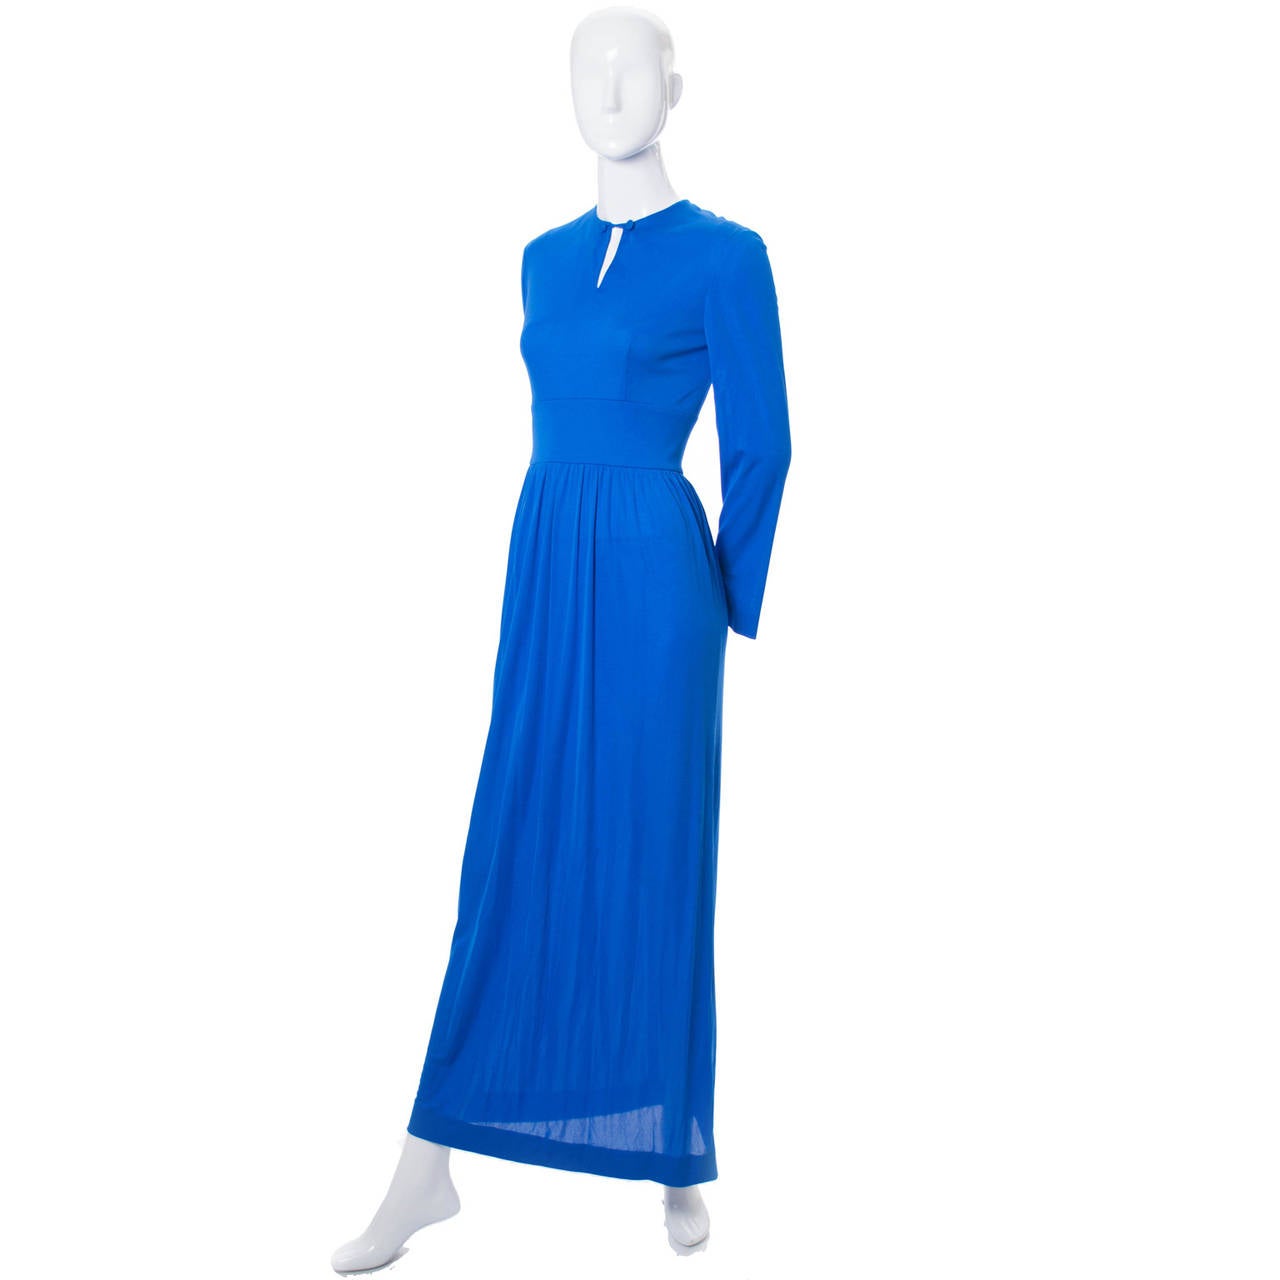 This pretty blue silk jersey Vintage Emilio Pucci designer dress was purchased at Saks Fifth Avenue in the late 1960s.  Pucci was famous for his silk jersey dresses and I love the keyhole opening in the bodice of this one. A little fashion